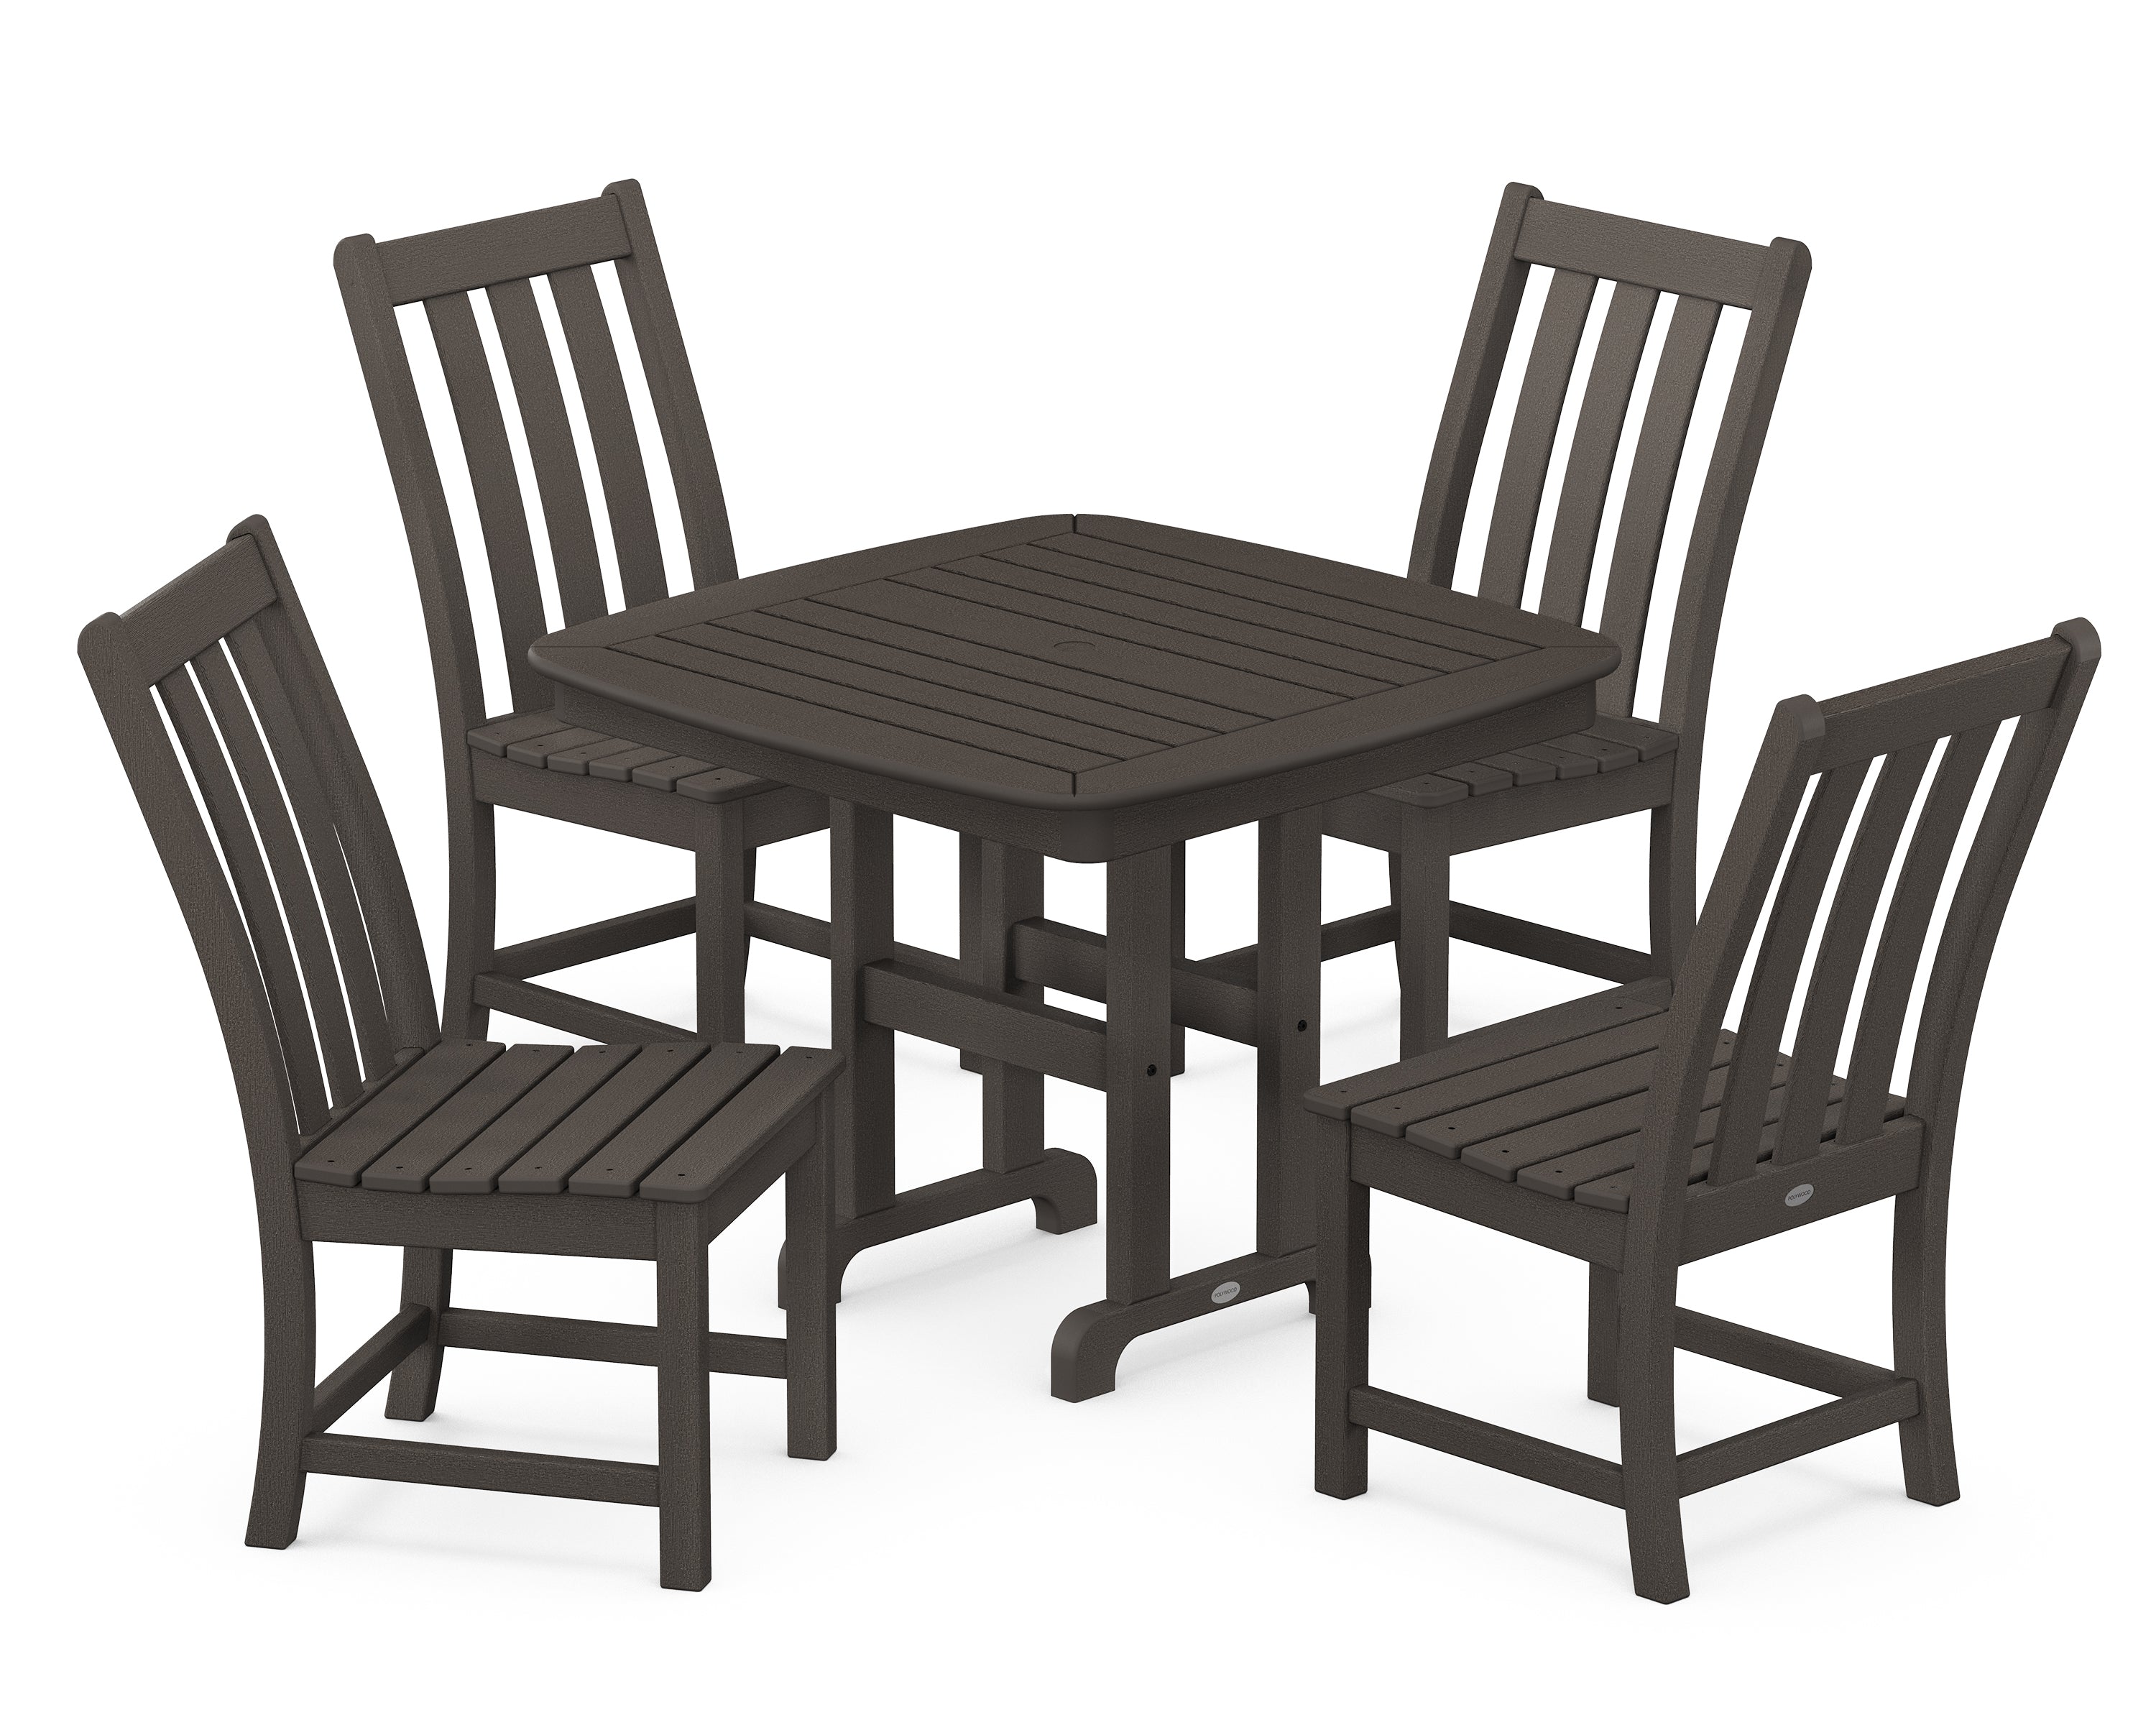 POLYWOOD® Vineyard 5-Piece Side Chair Dining Set in Vintage Coffee